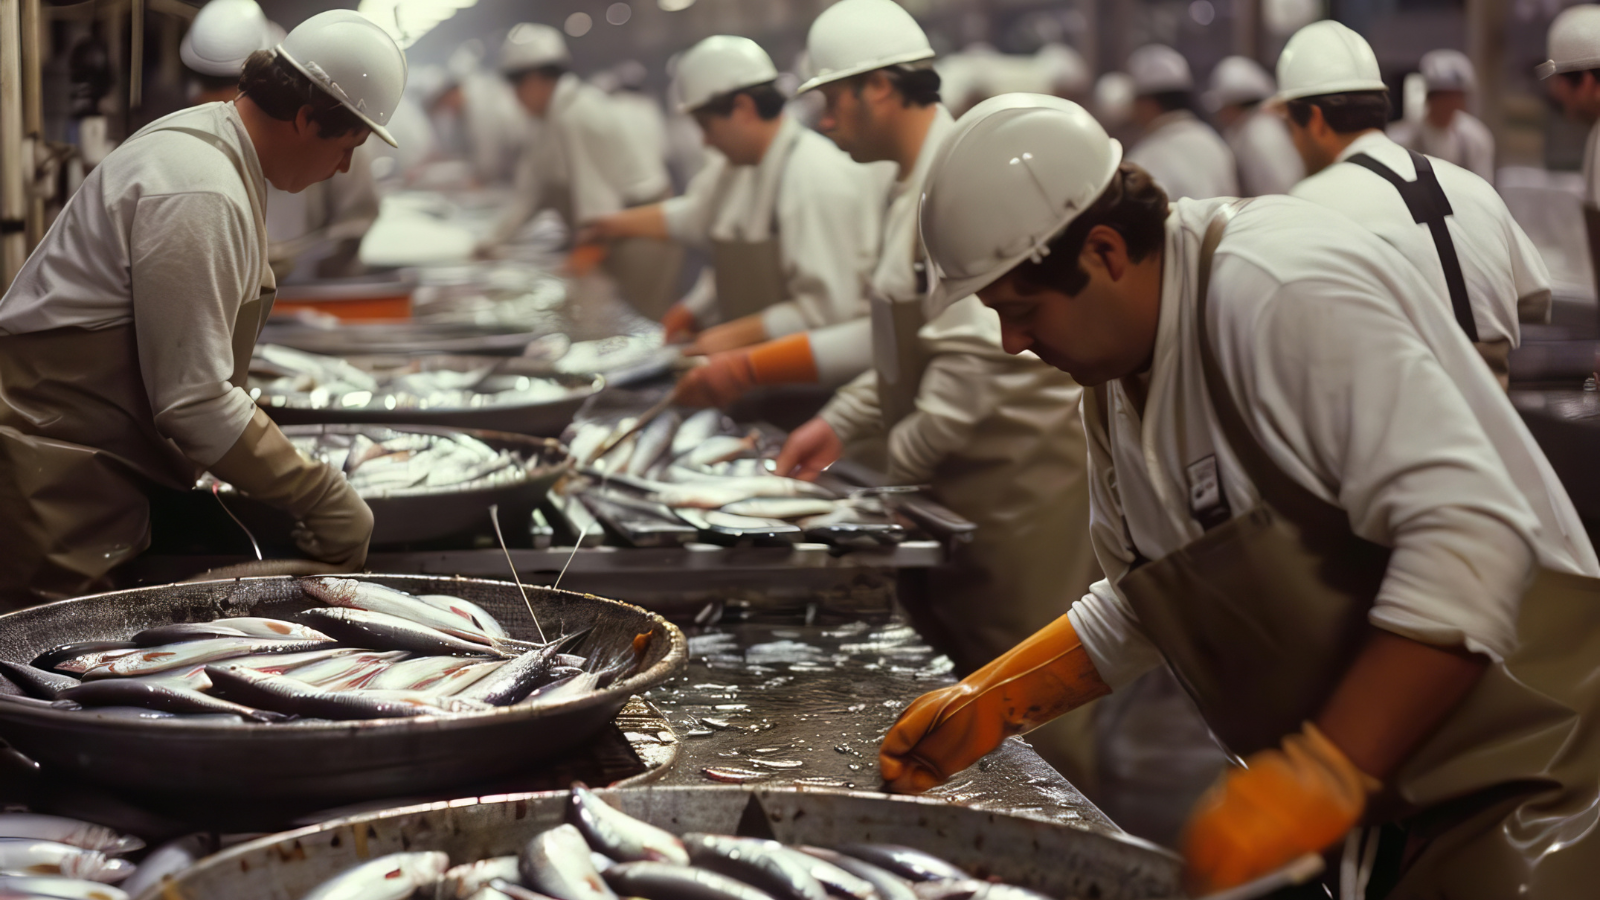 COVID-19 prevention among seafood workers